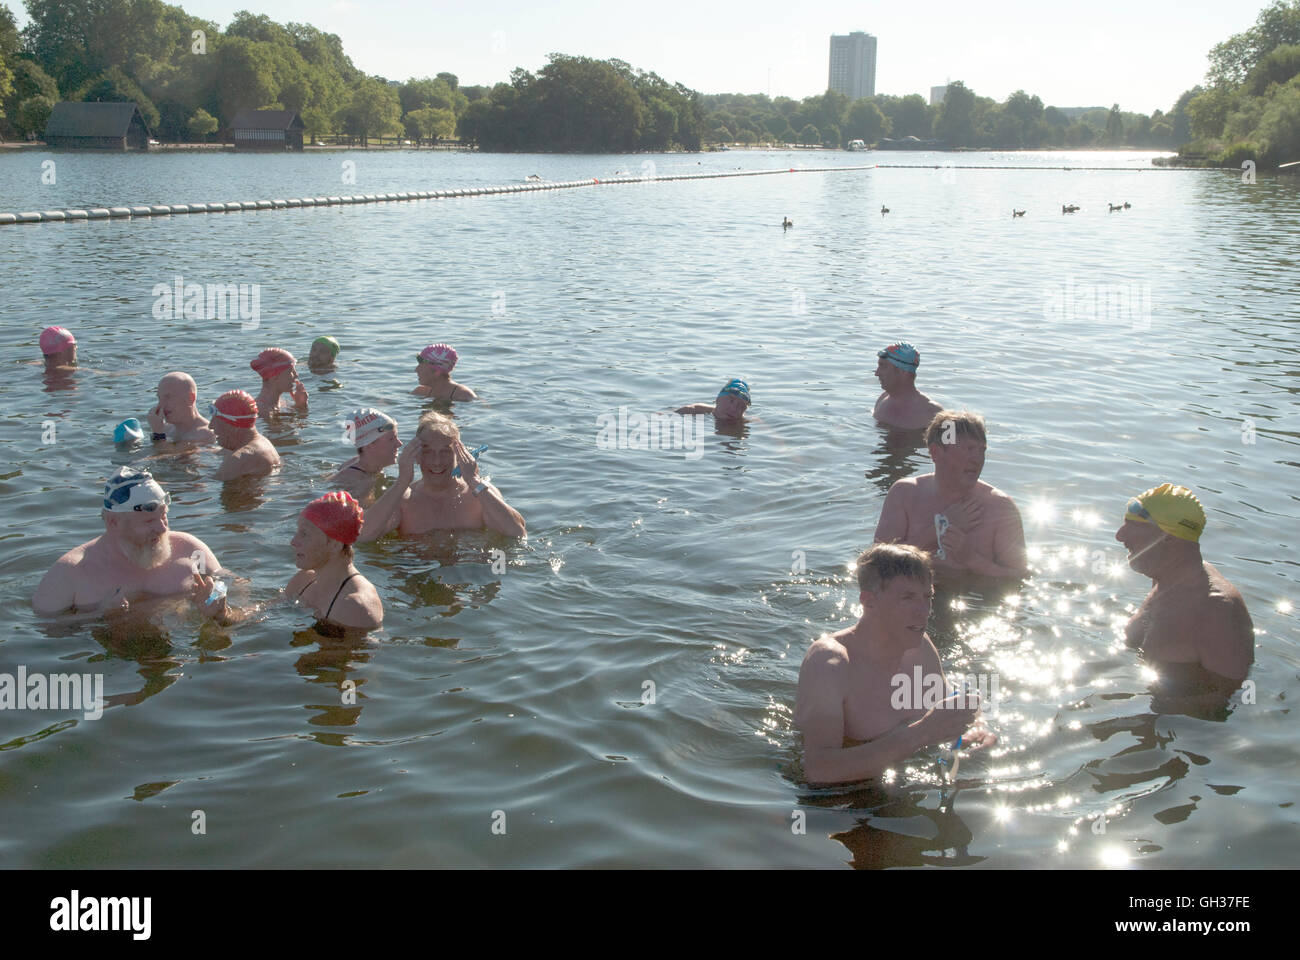 Serpentine Lido, Hyde Park Lake London. People swimming early morning summer sunshine Hilton Hotel in distance. Uk 2016 2010s  HOMER SYKES Stock Photo